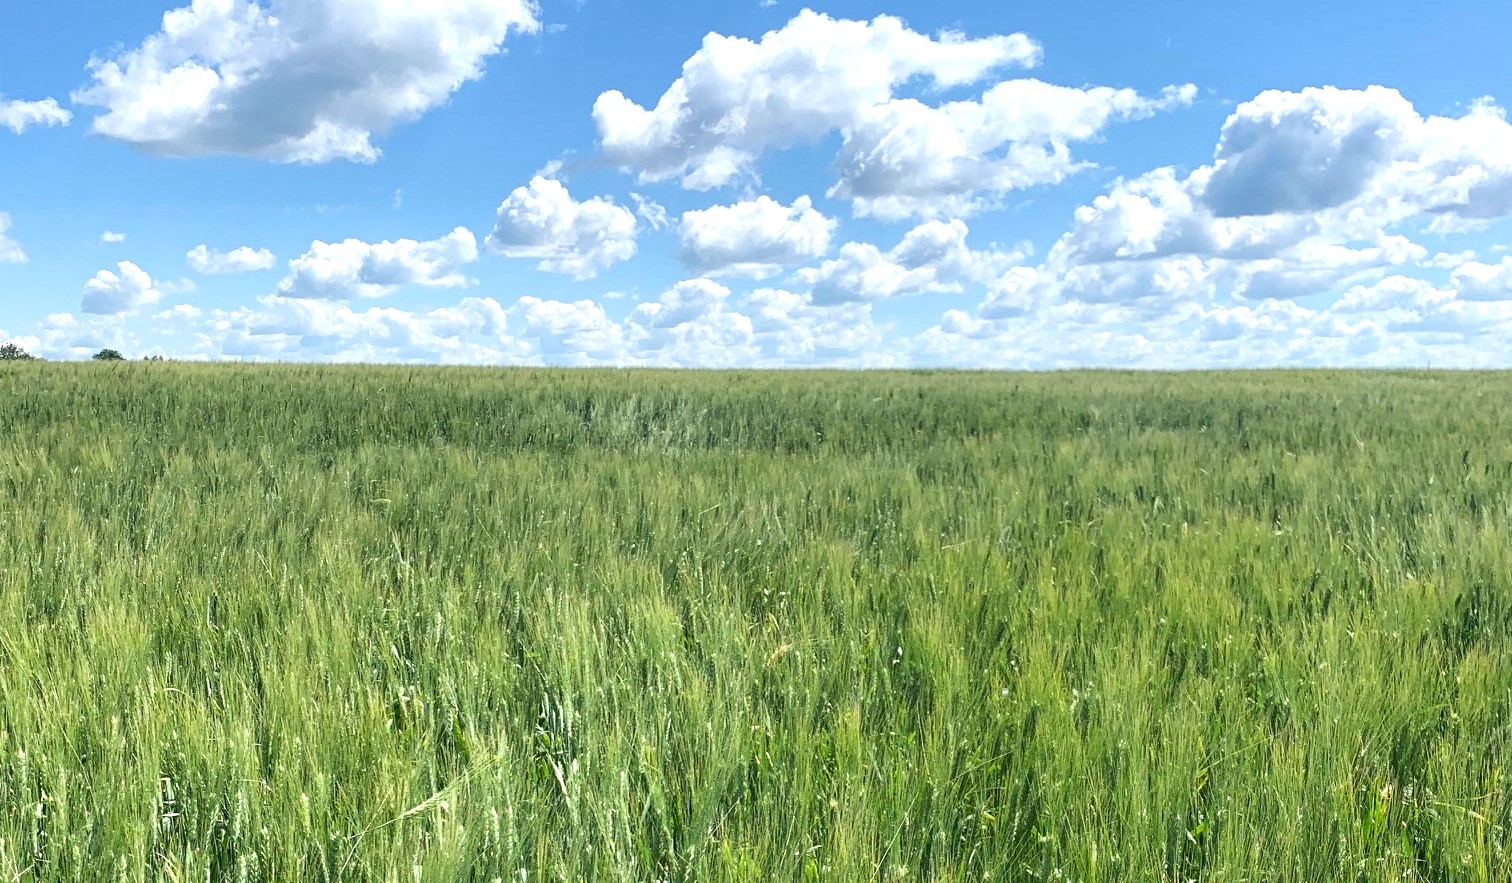 Photo from spring wheat tour of a high yield potential field near Tioga, North Dakota